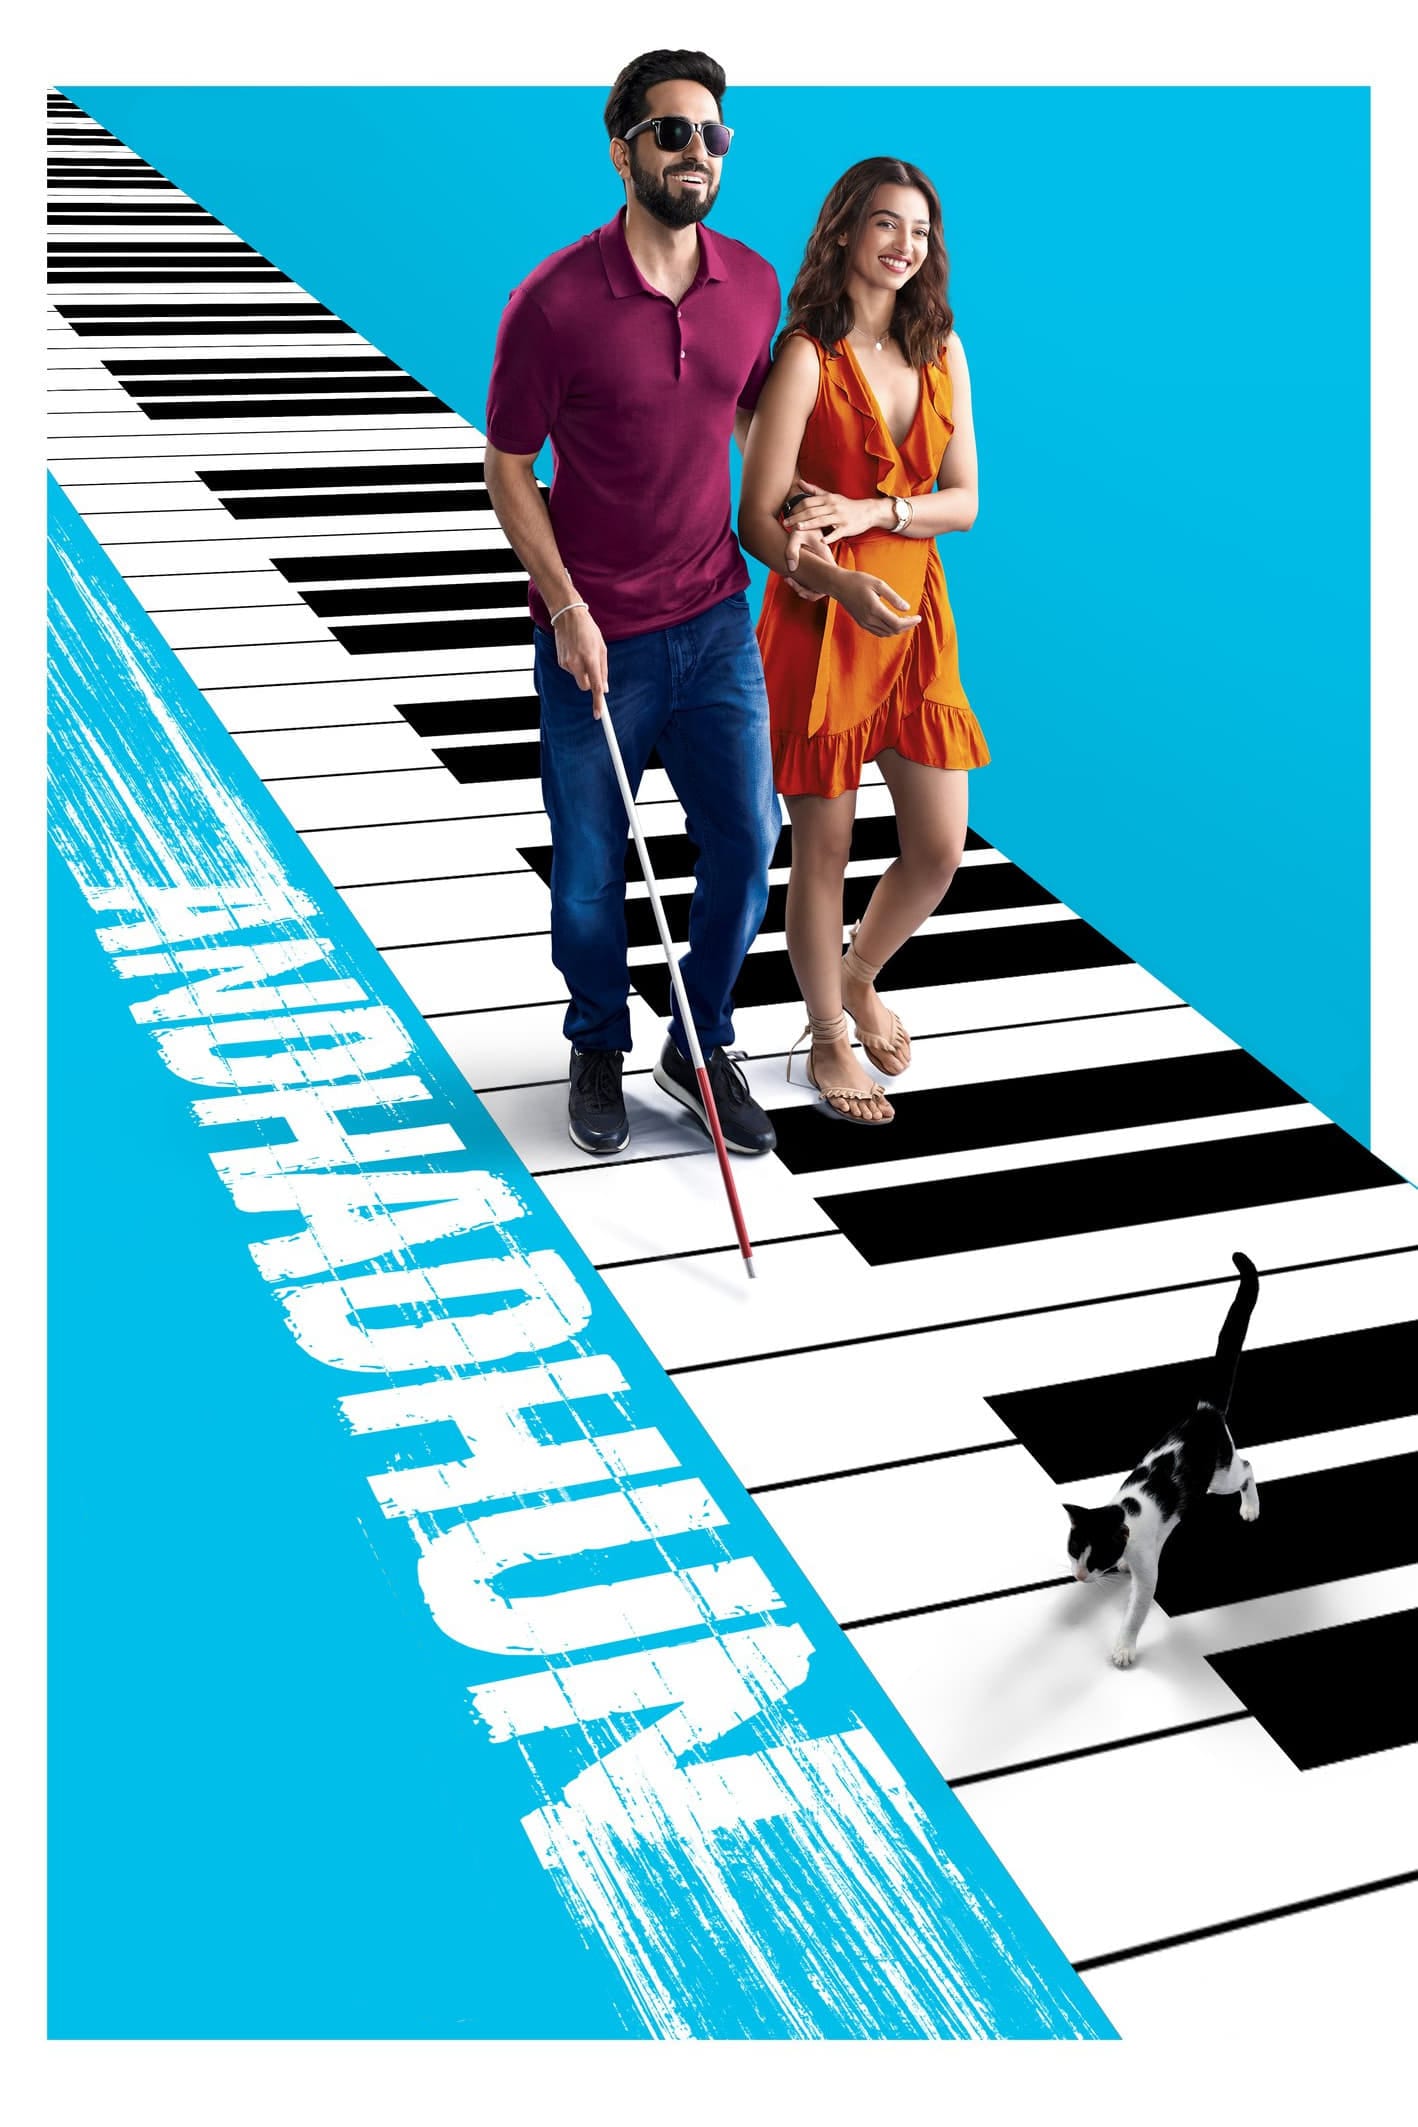 Poster for the movie "Andhadhun"